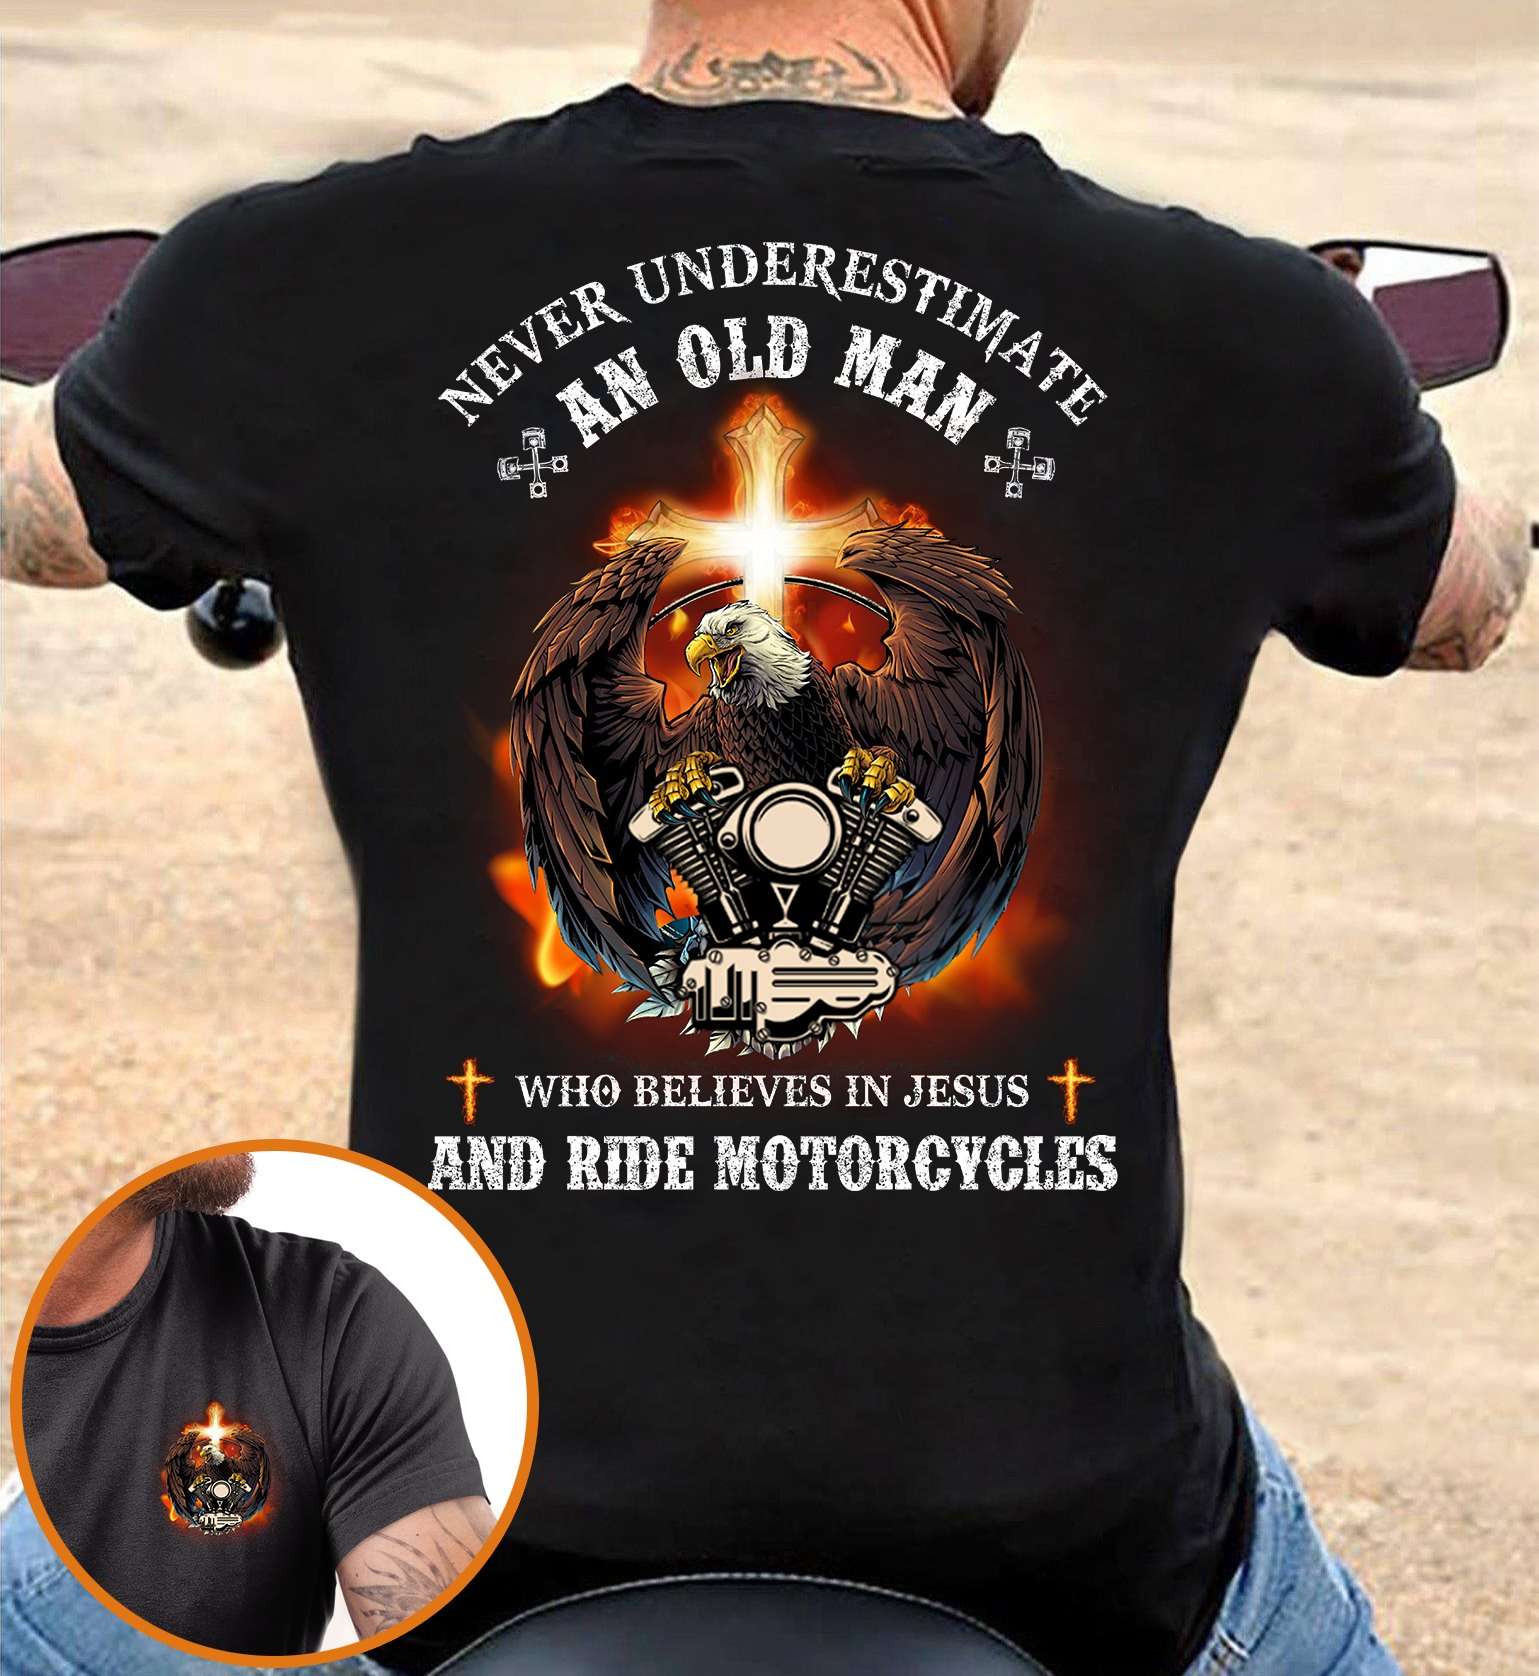 Never underestimate an old man who believes in Jesus and ride motorcycles - Old man biker's gift